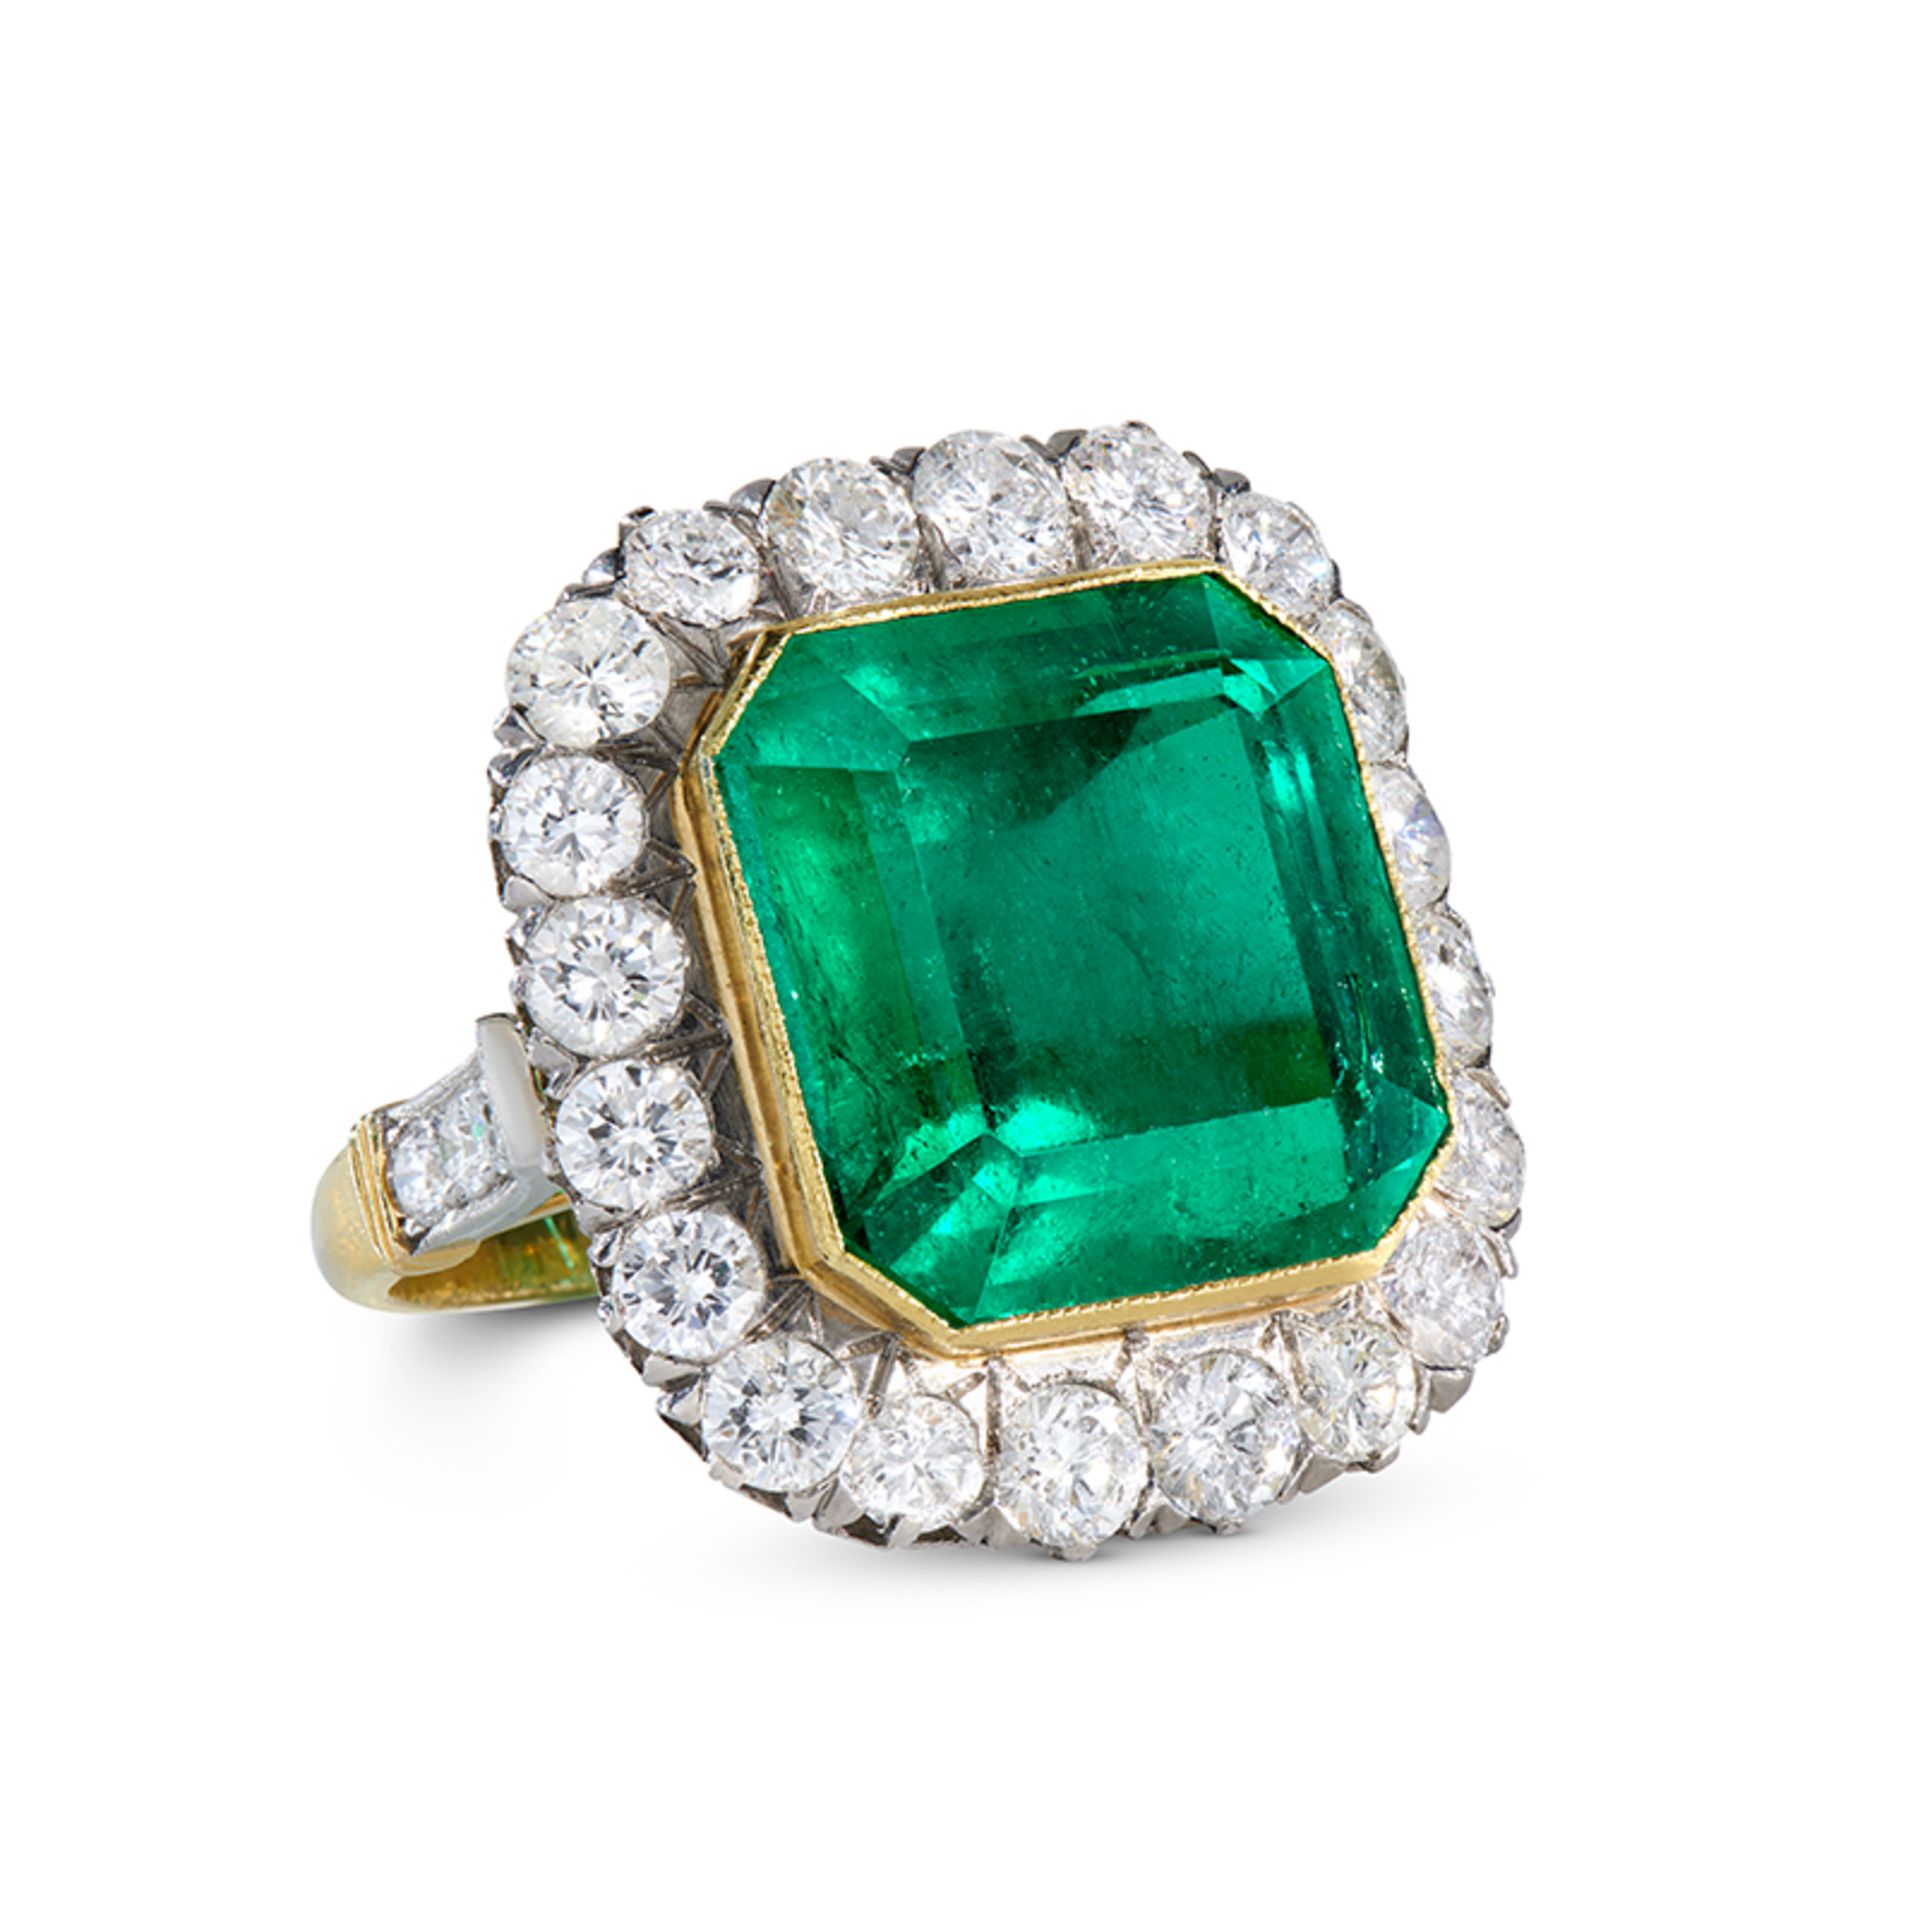 A FINE COLOMBIAN EMERALD AND DIAMOND RING in 18ct yellow gold, set with an octagonal step cut eme...